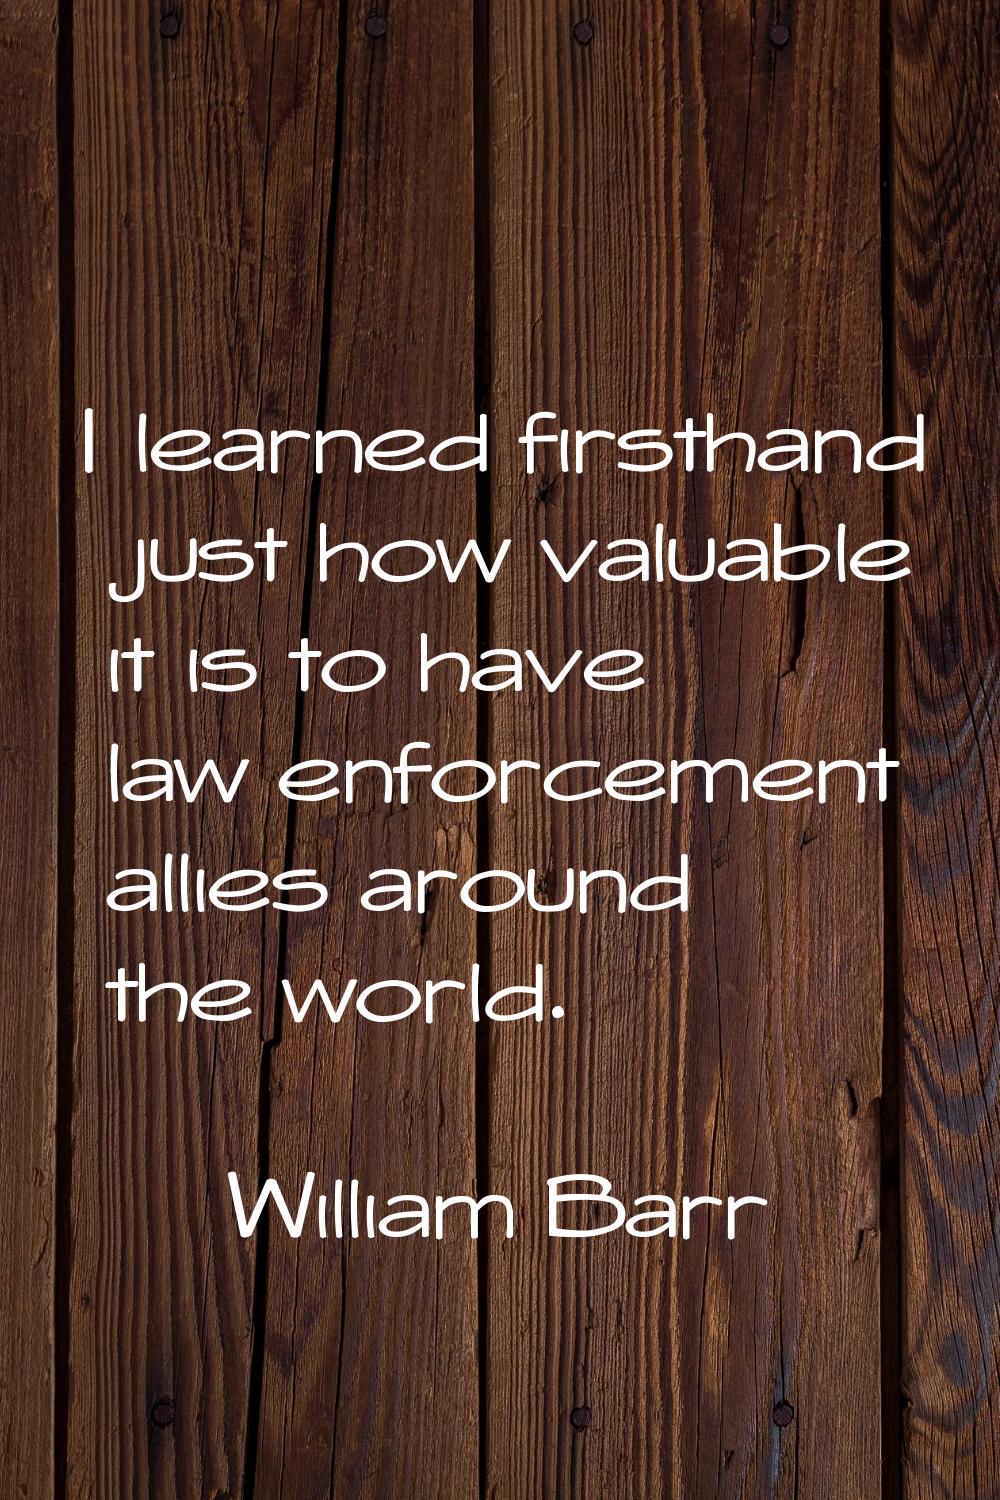 I learned firsthand just how valuable it is to have law enforcement allies around the world.